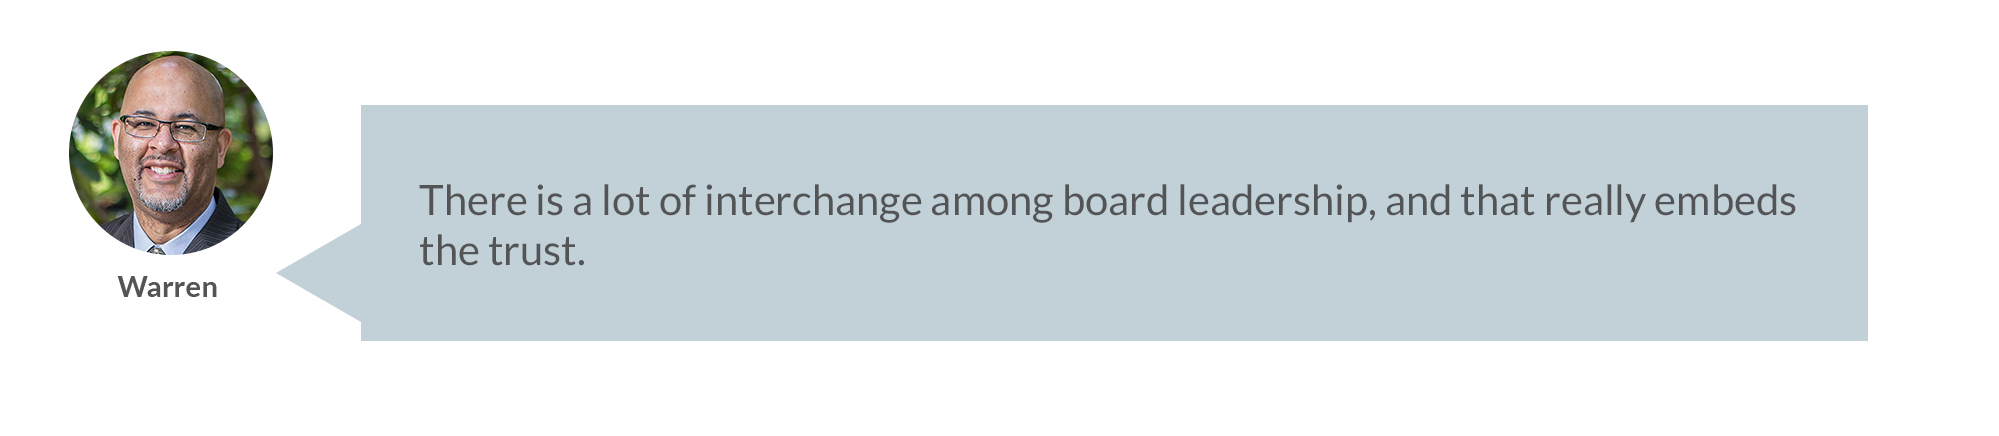 There is a lot of interchange among board leadership, and that really embeds the trust. 